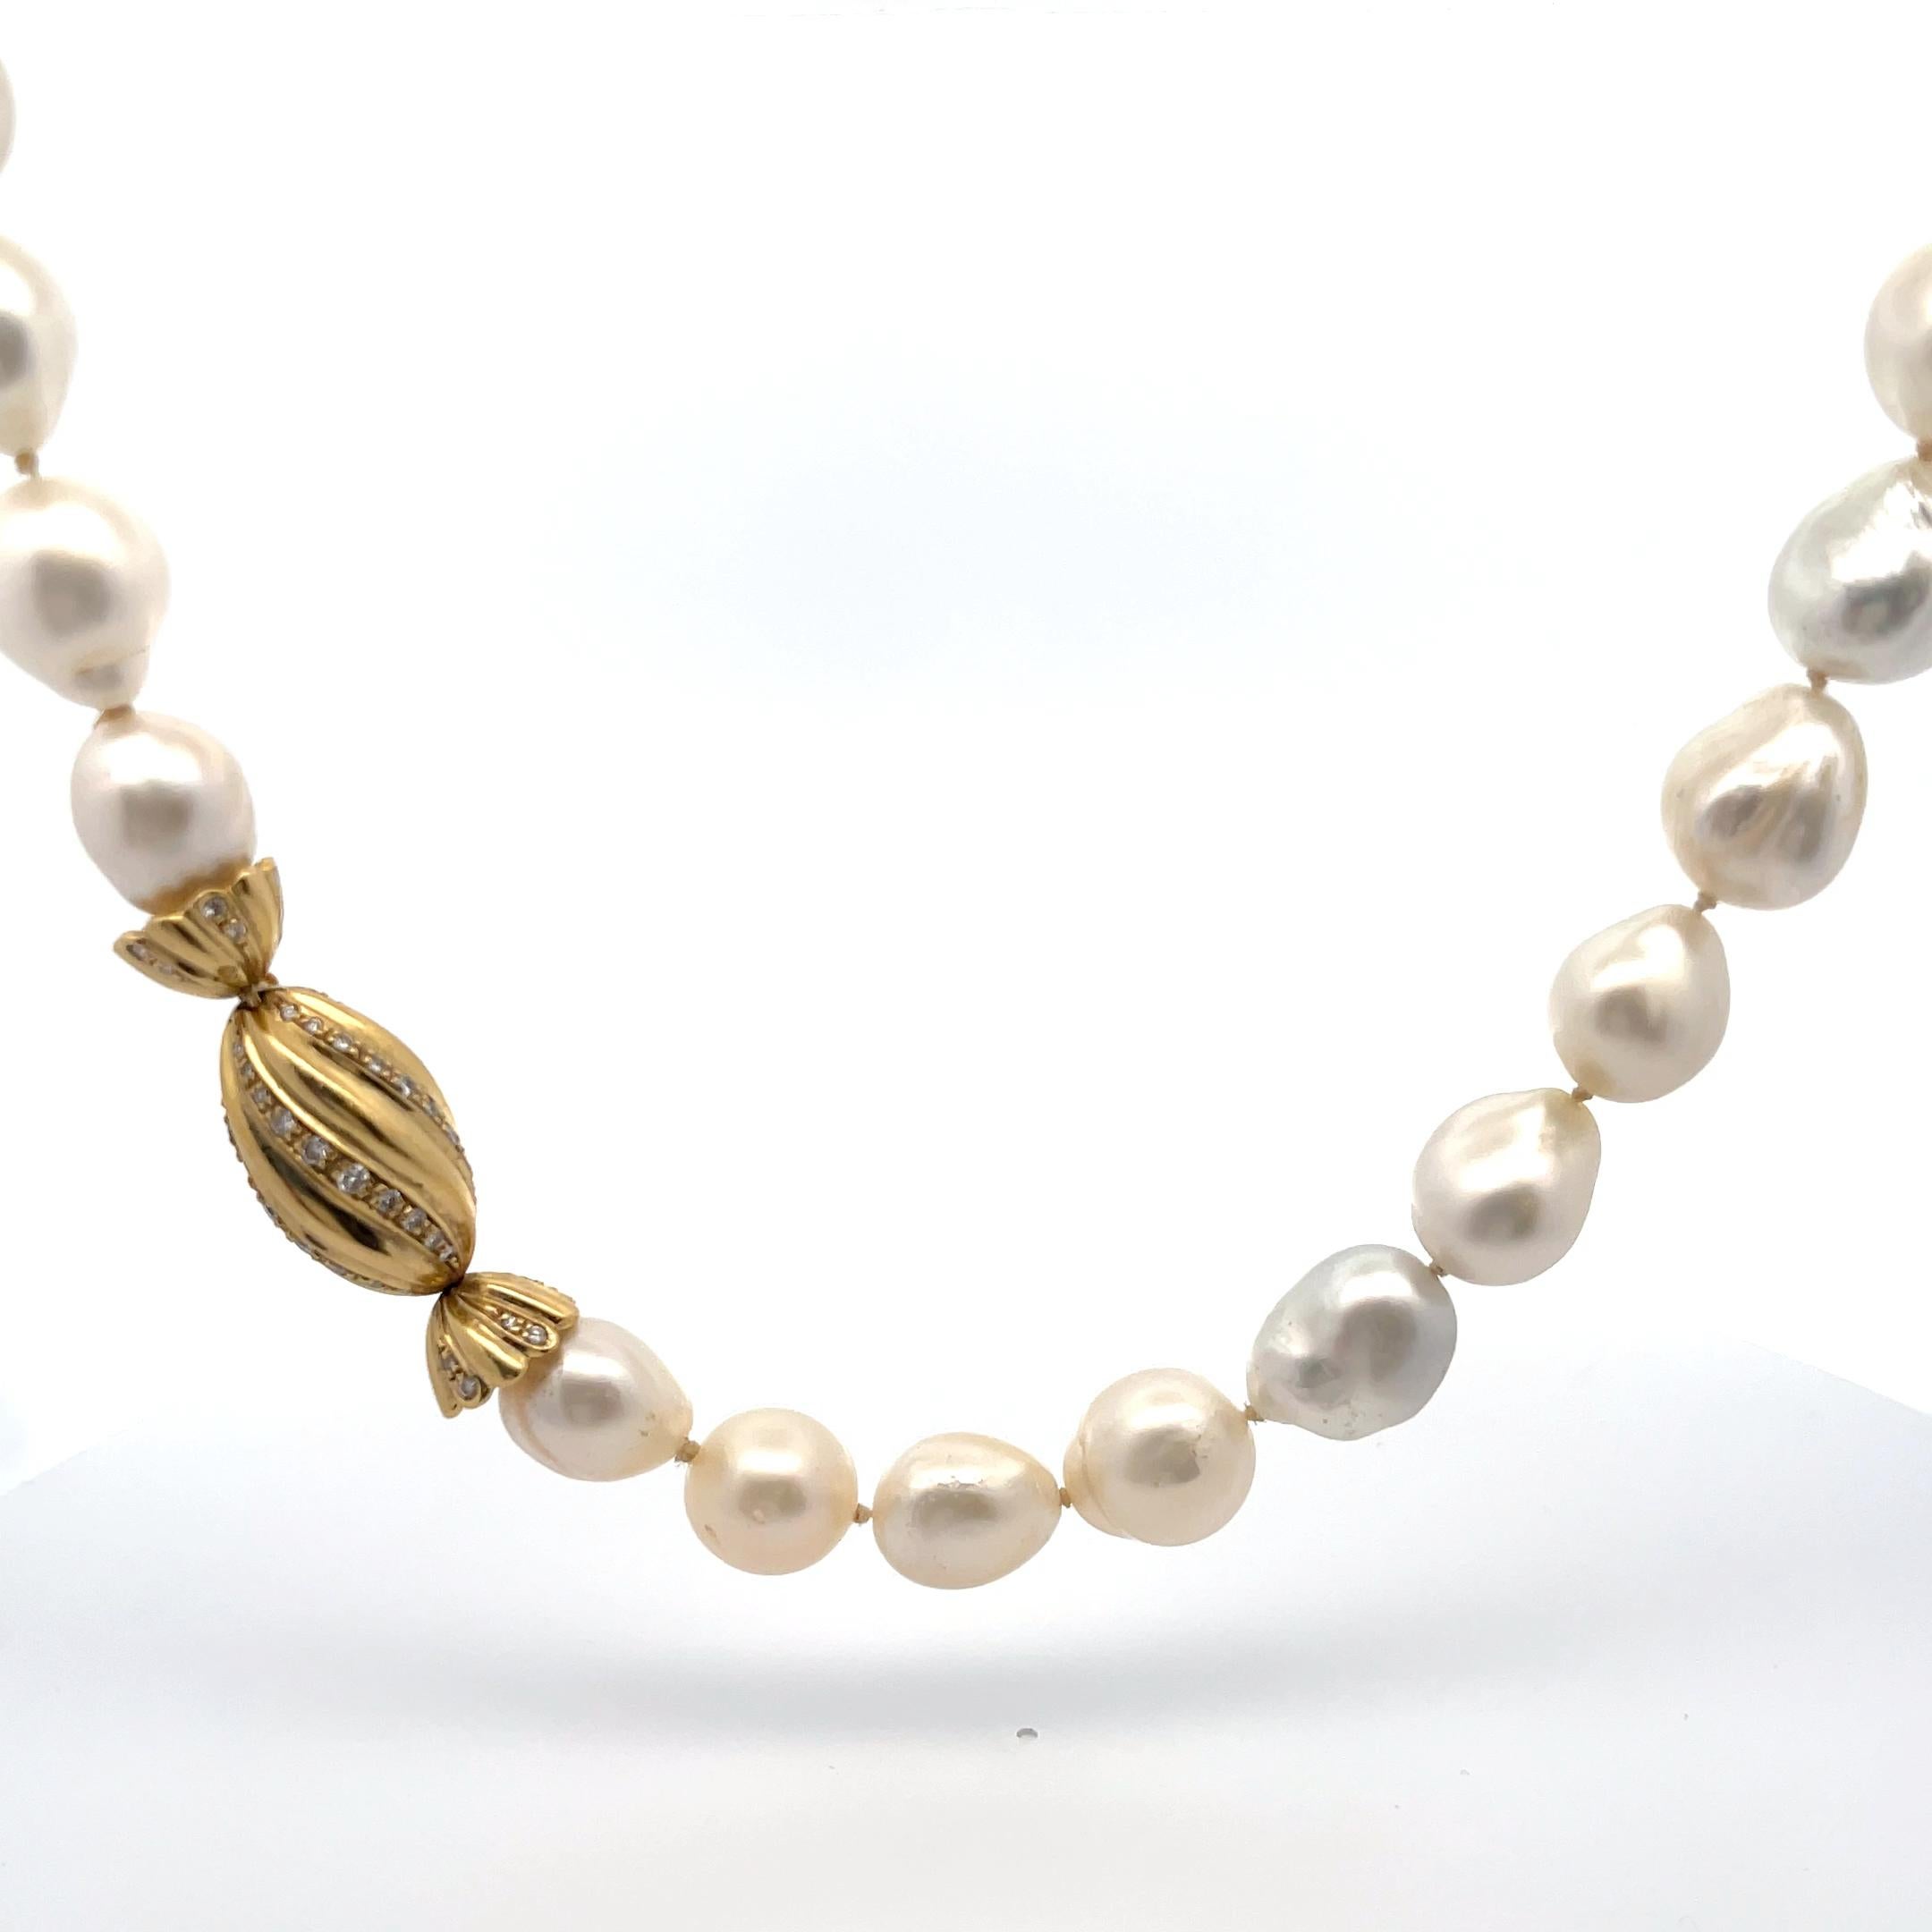 Mixed Cut South Sea White Baroque Pearl Necklace 18K Yellow Gold Diamond Clasp For Sale